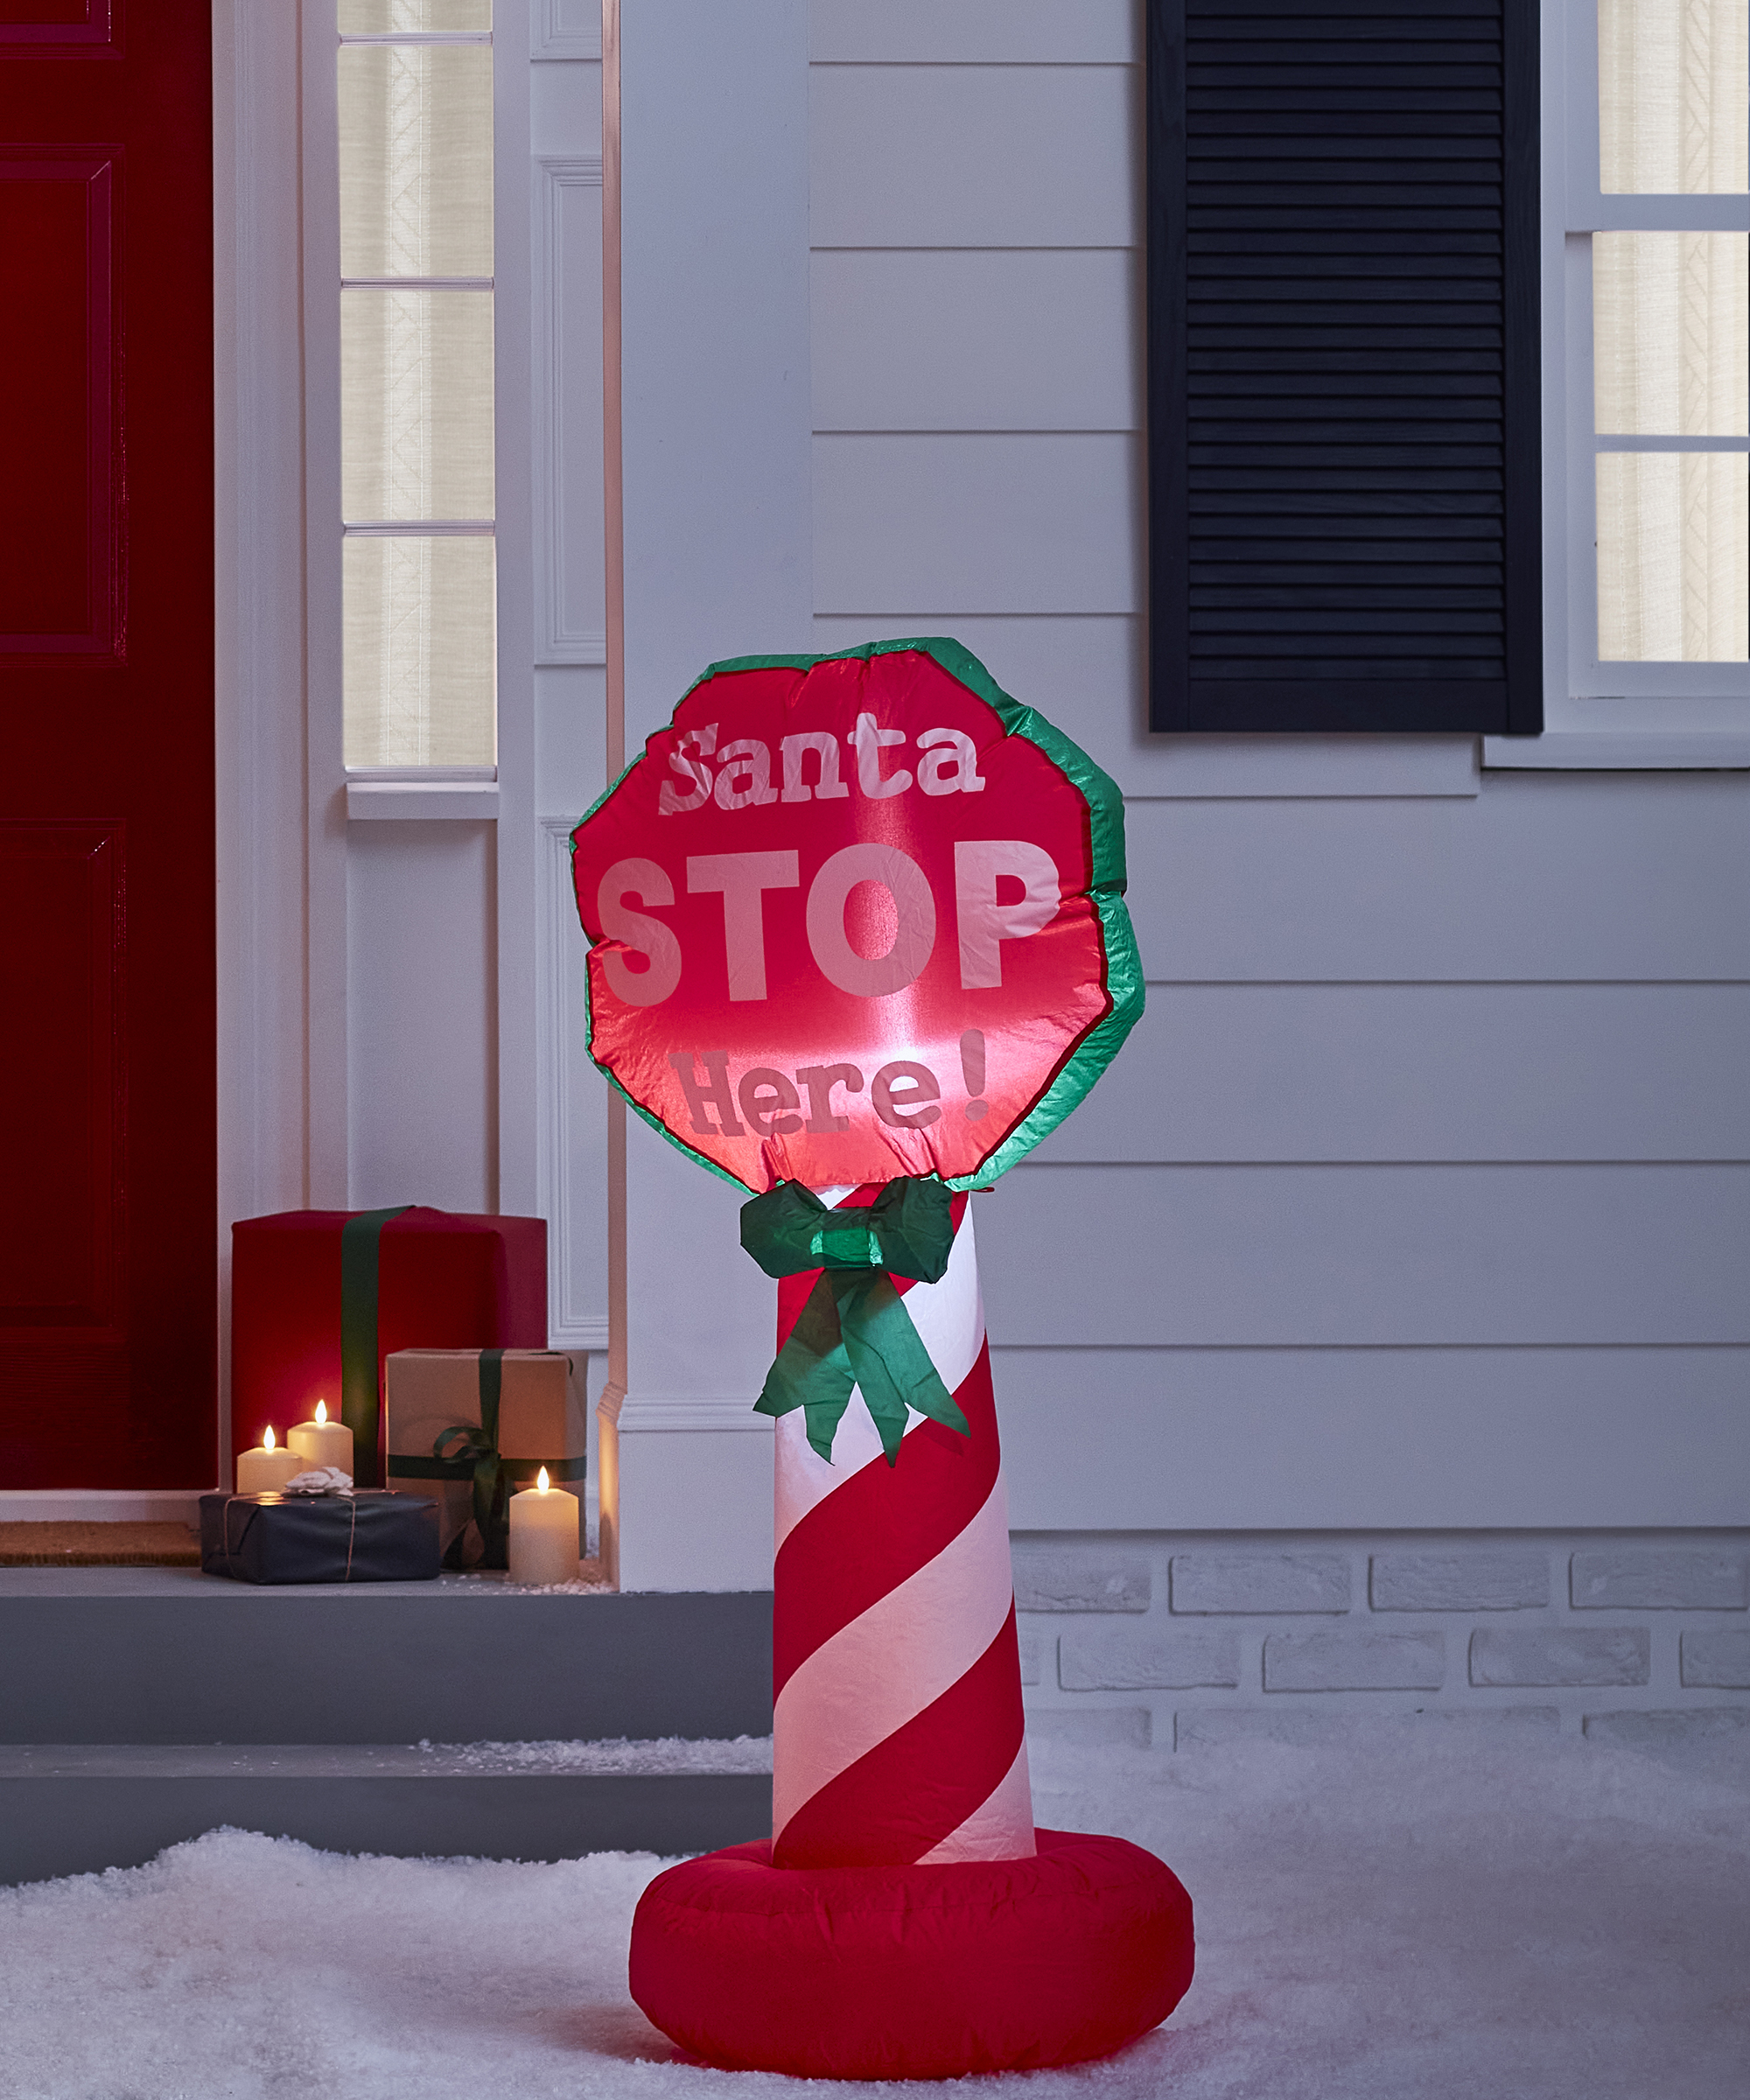 Santa stop here directional signpost red and green Christmas inflatable